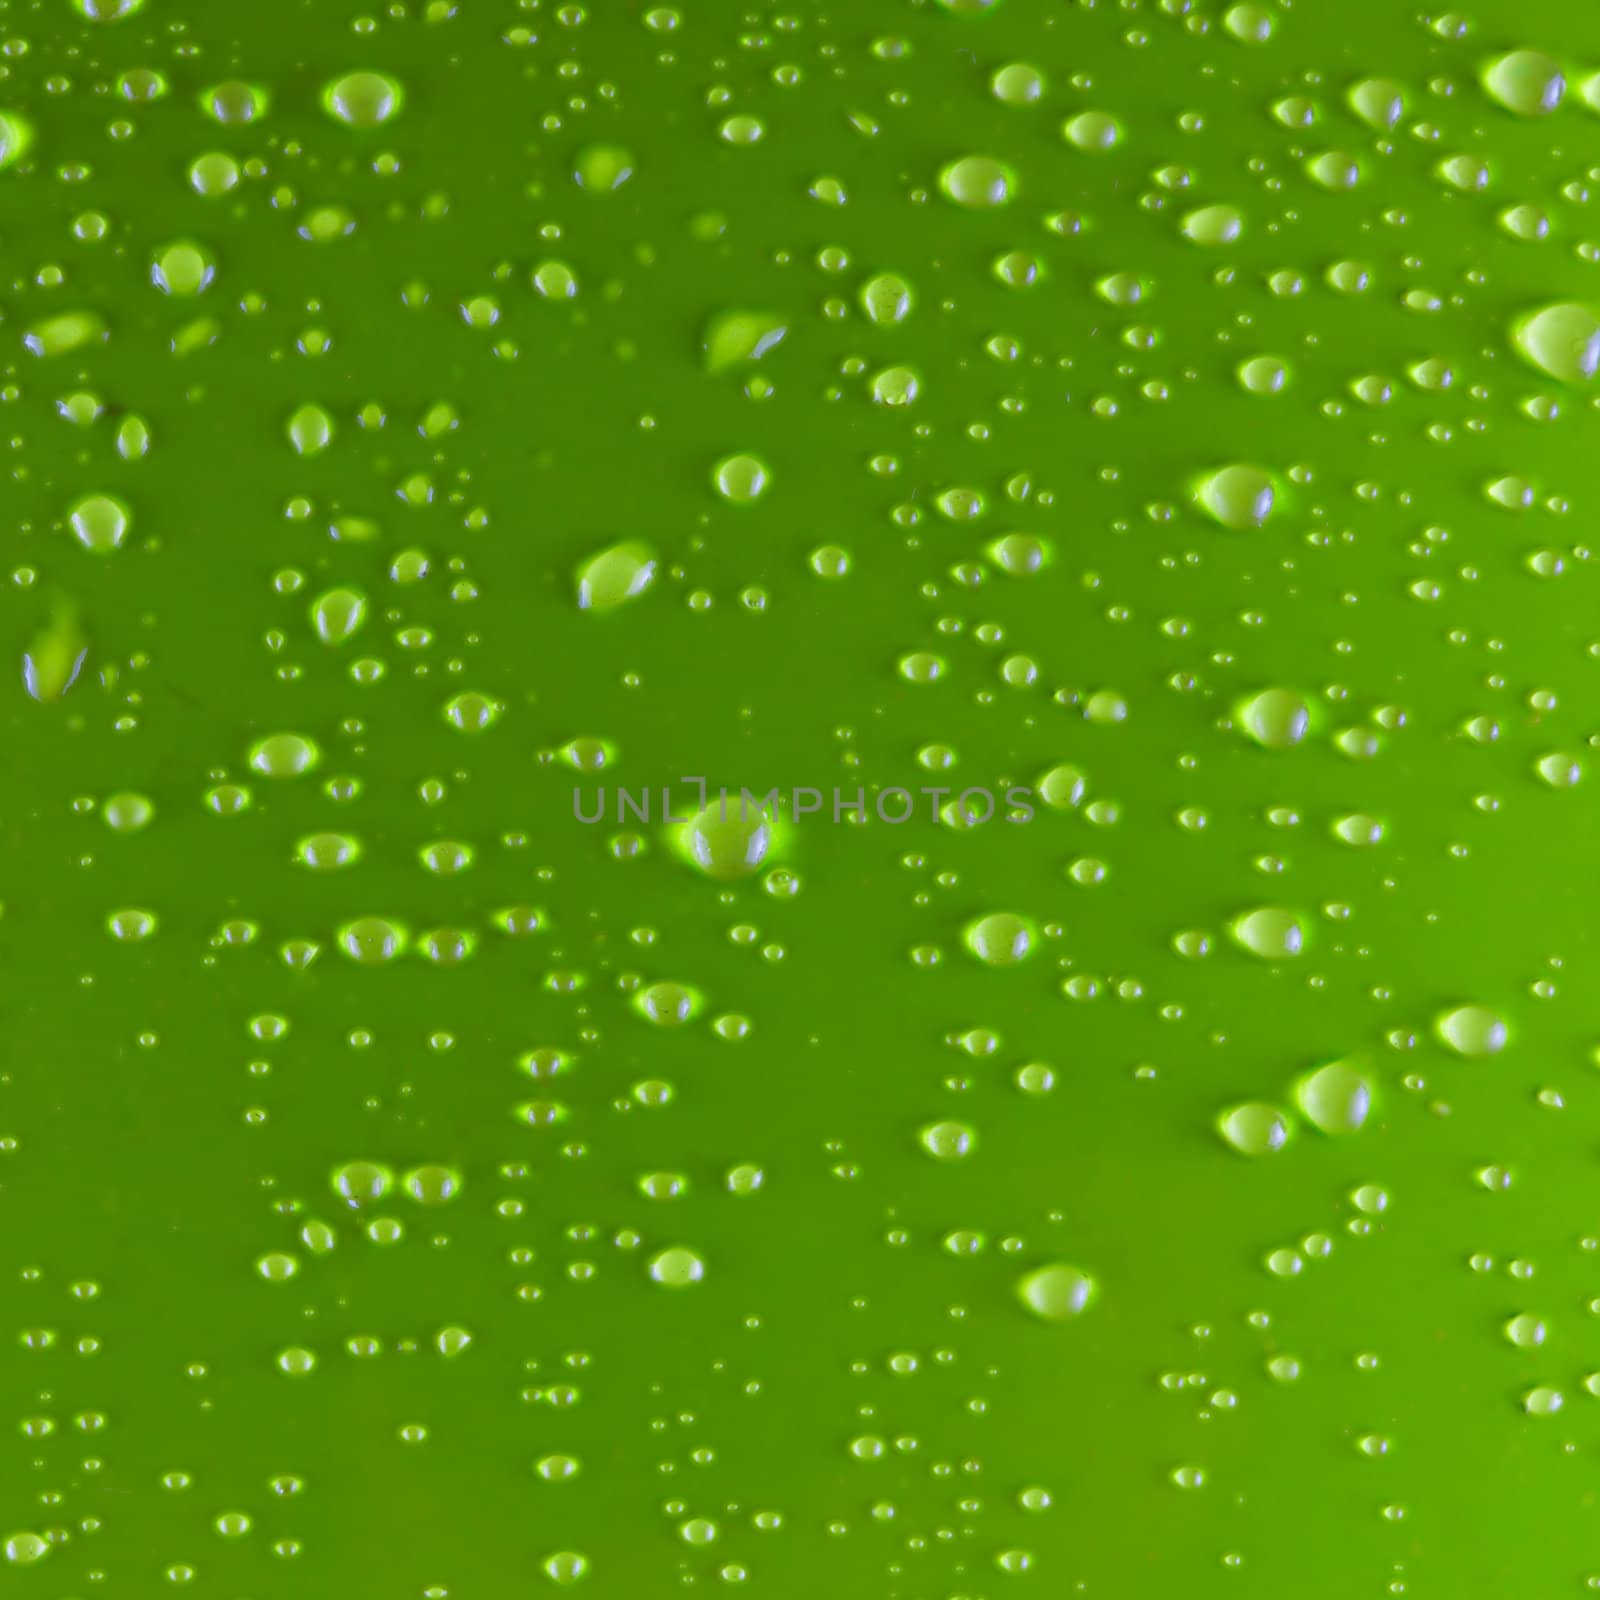 Green drops background by Koufax73